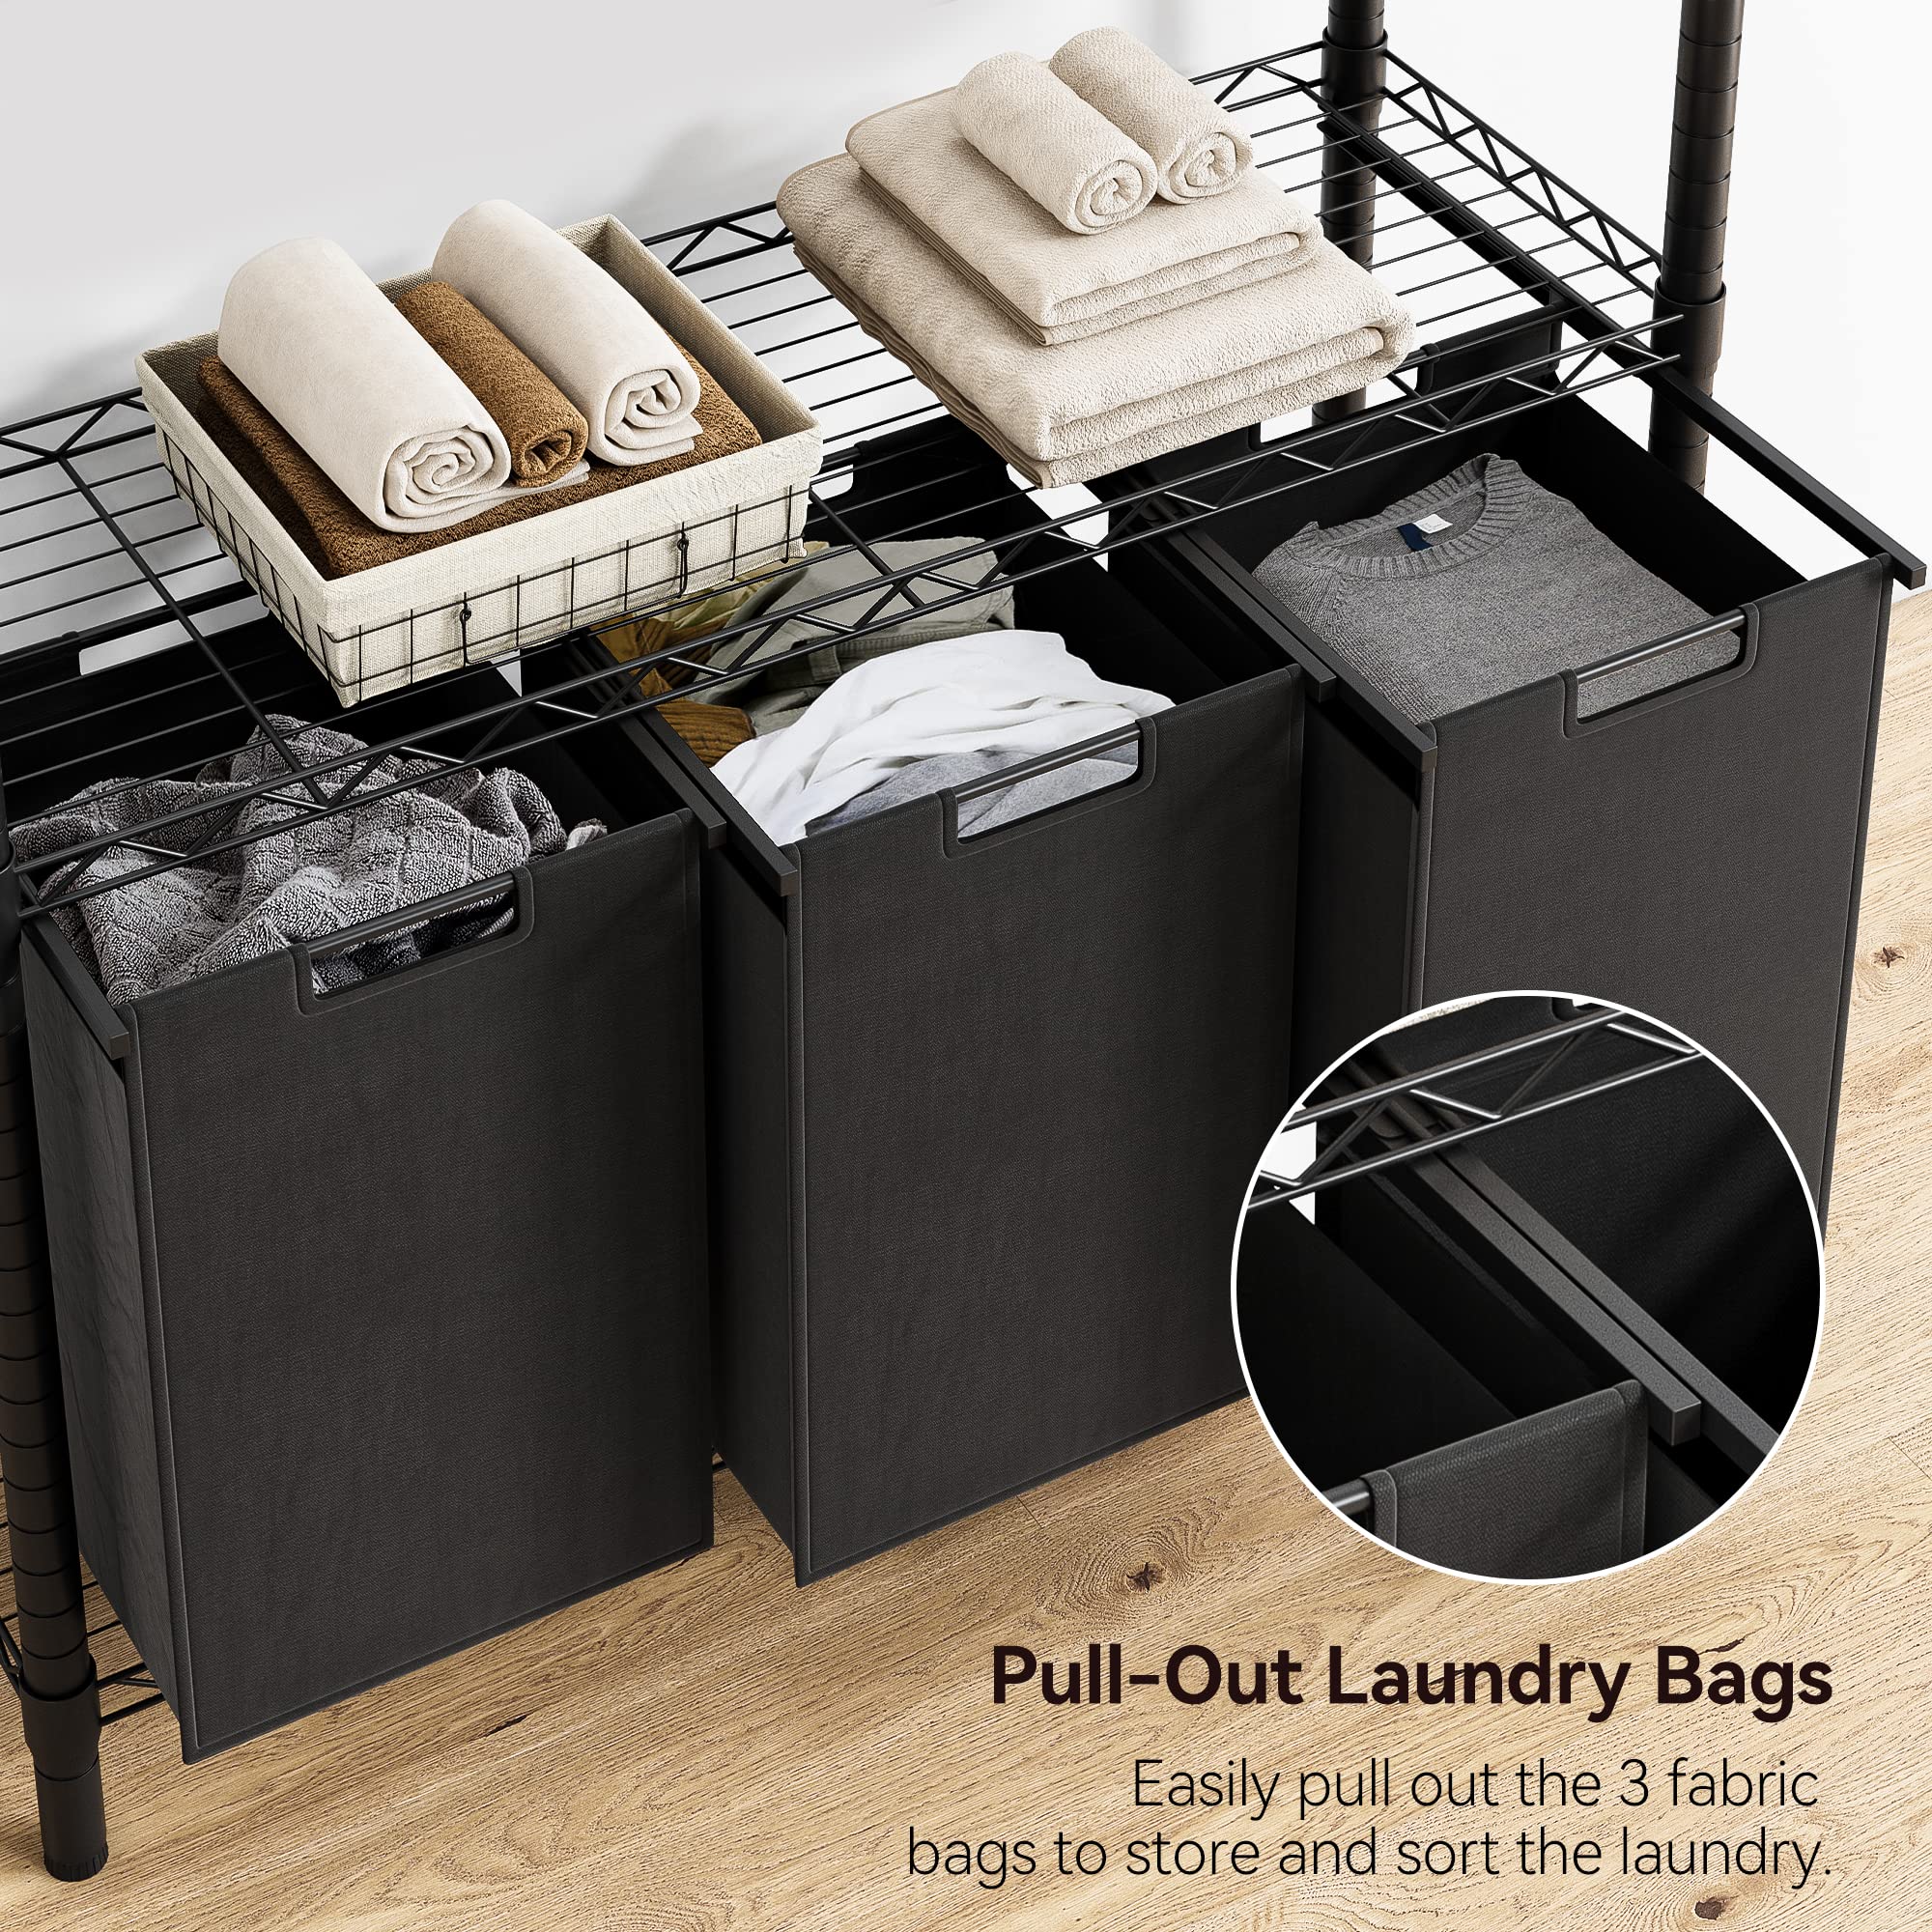 Laundry Sorters 3 Section with 3 X 45L Laundry Bags, 2 Tier Adjustable Metal Storage Shelf, Pull-Out & Removable Oxford Fabric Laundry Baskets, Black